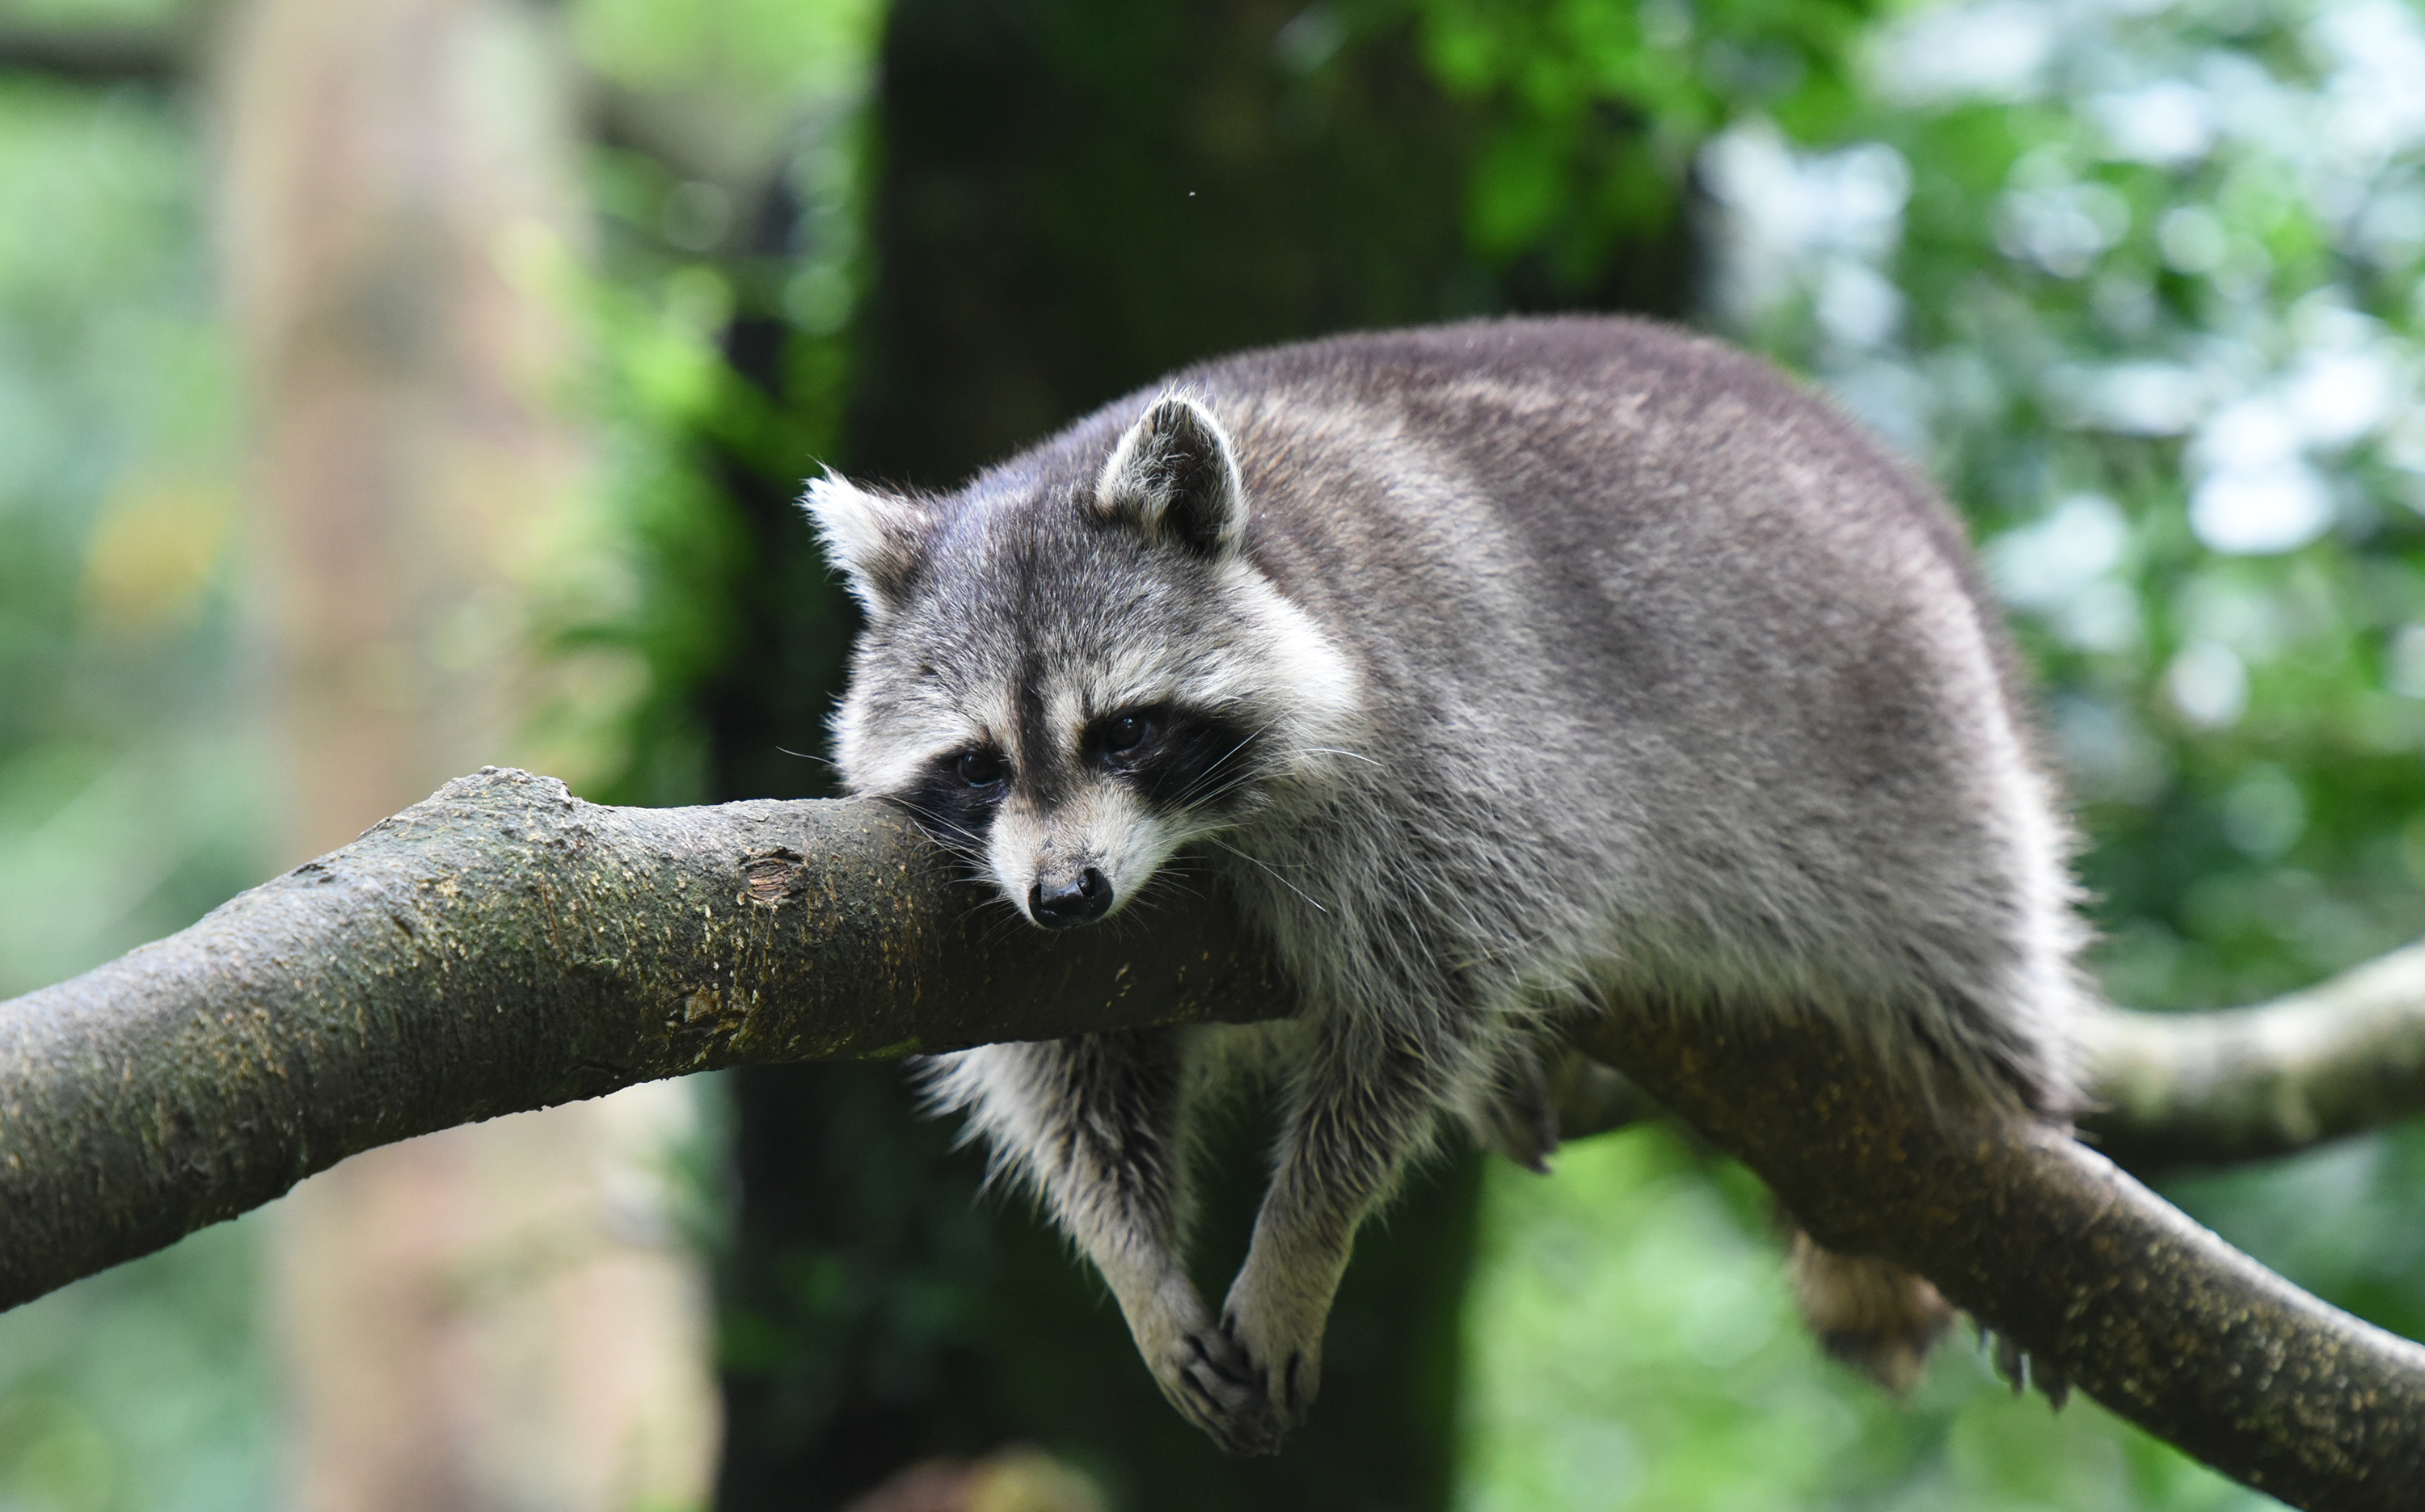 A raccoon on a branch.